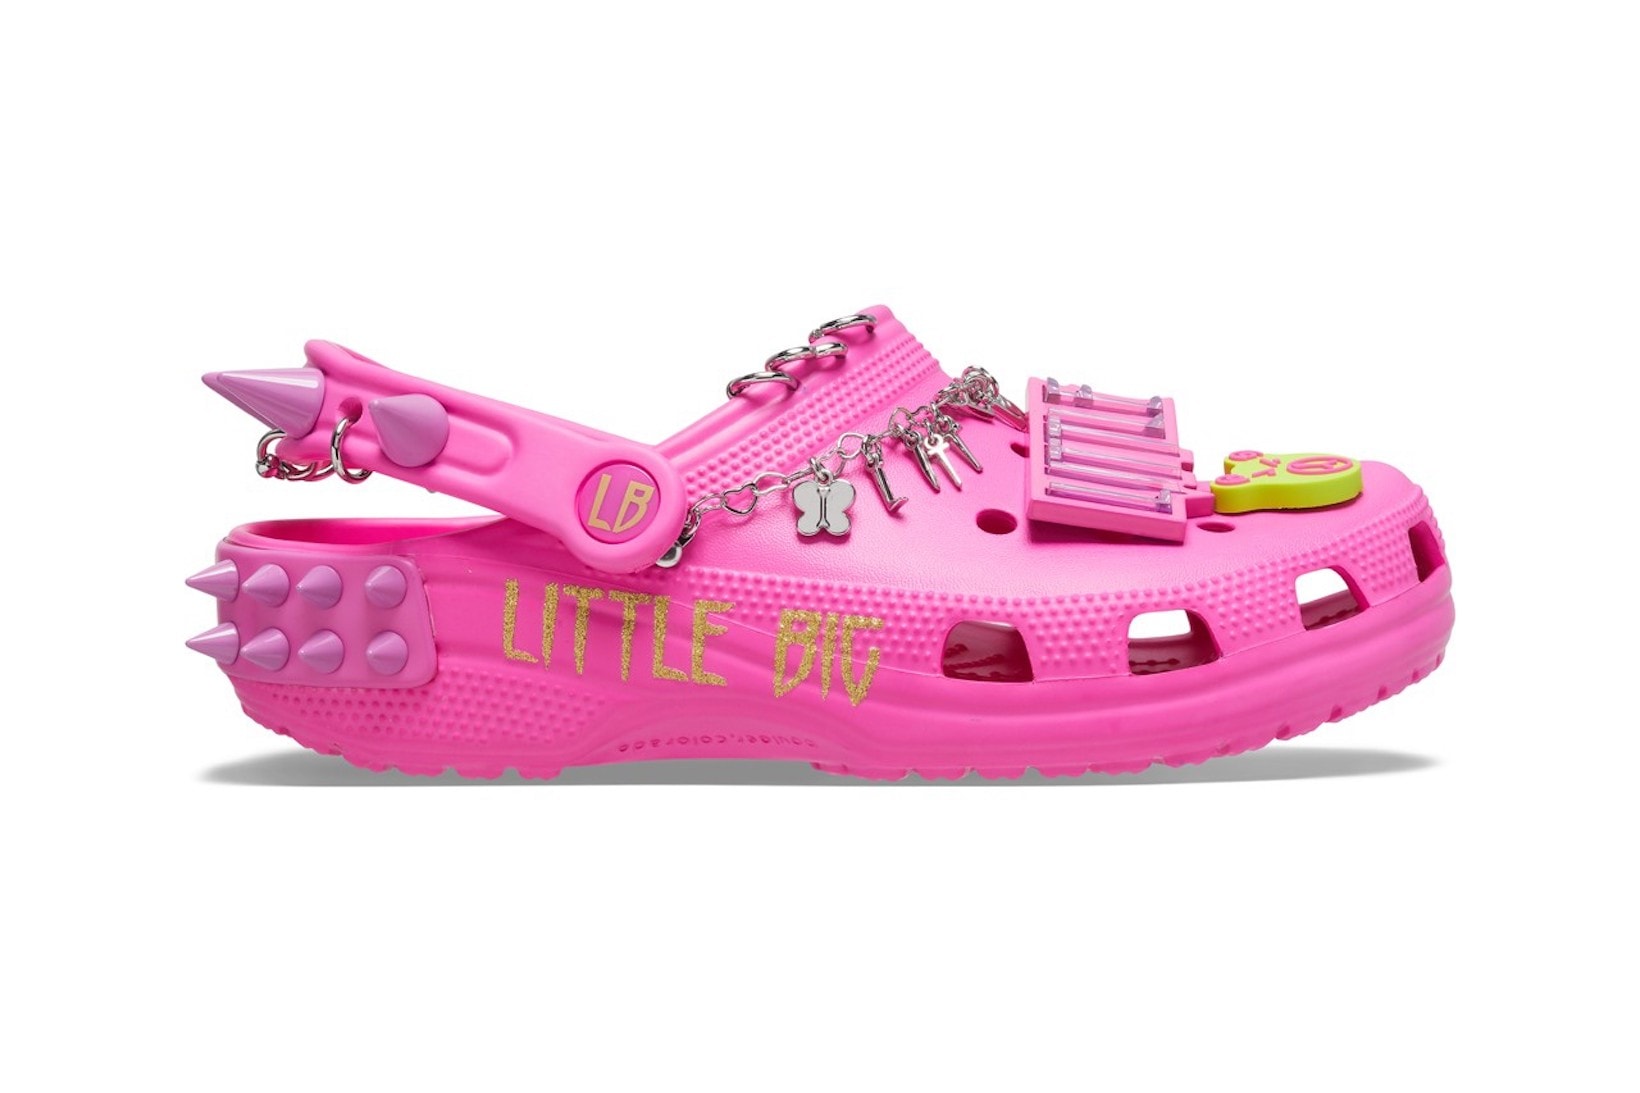 Pin by Popping.society on Crocs  Pink crocs, Crocs fashion, Crocs with  charms